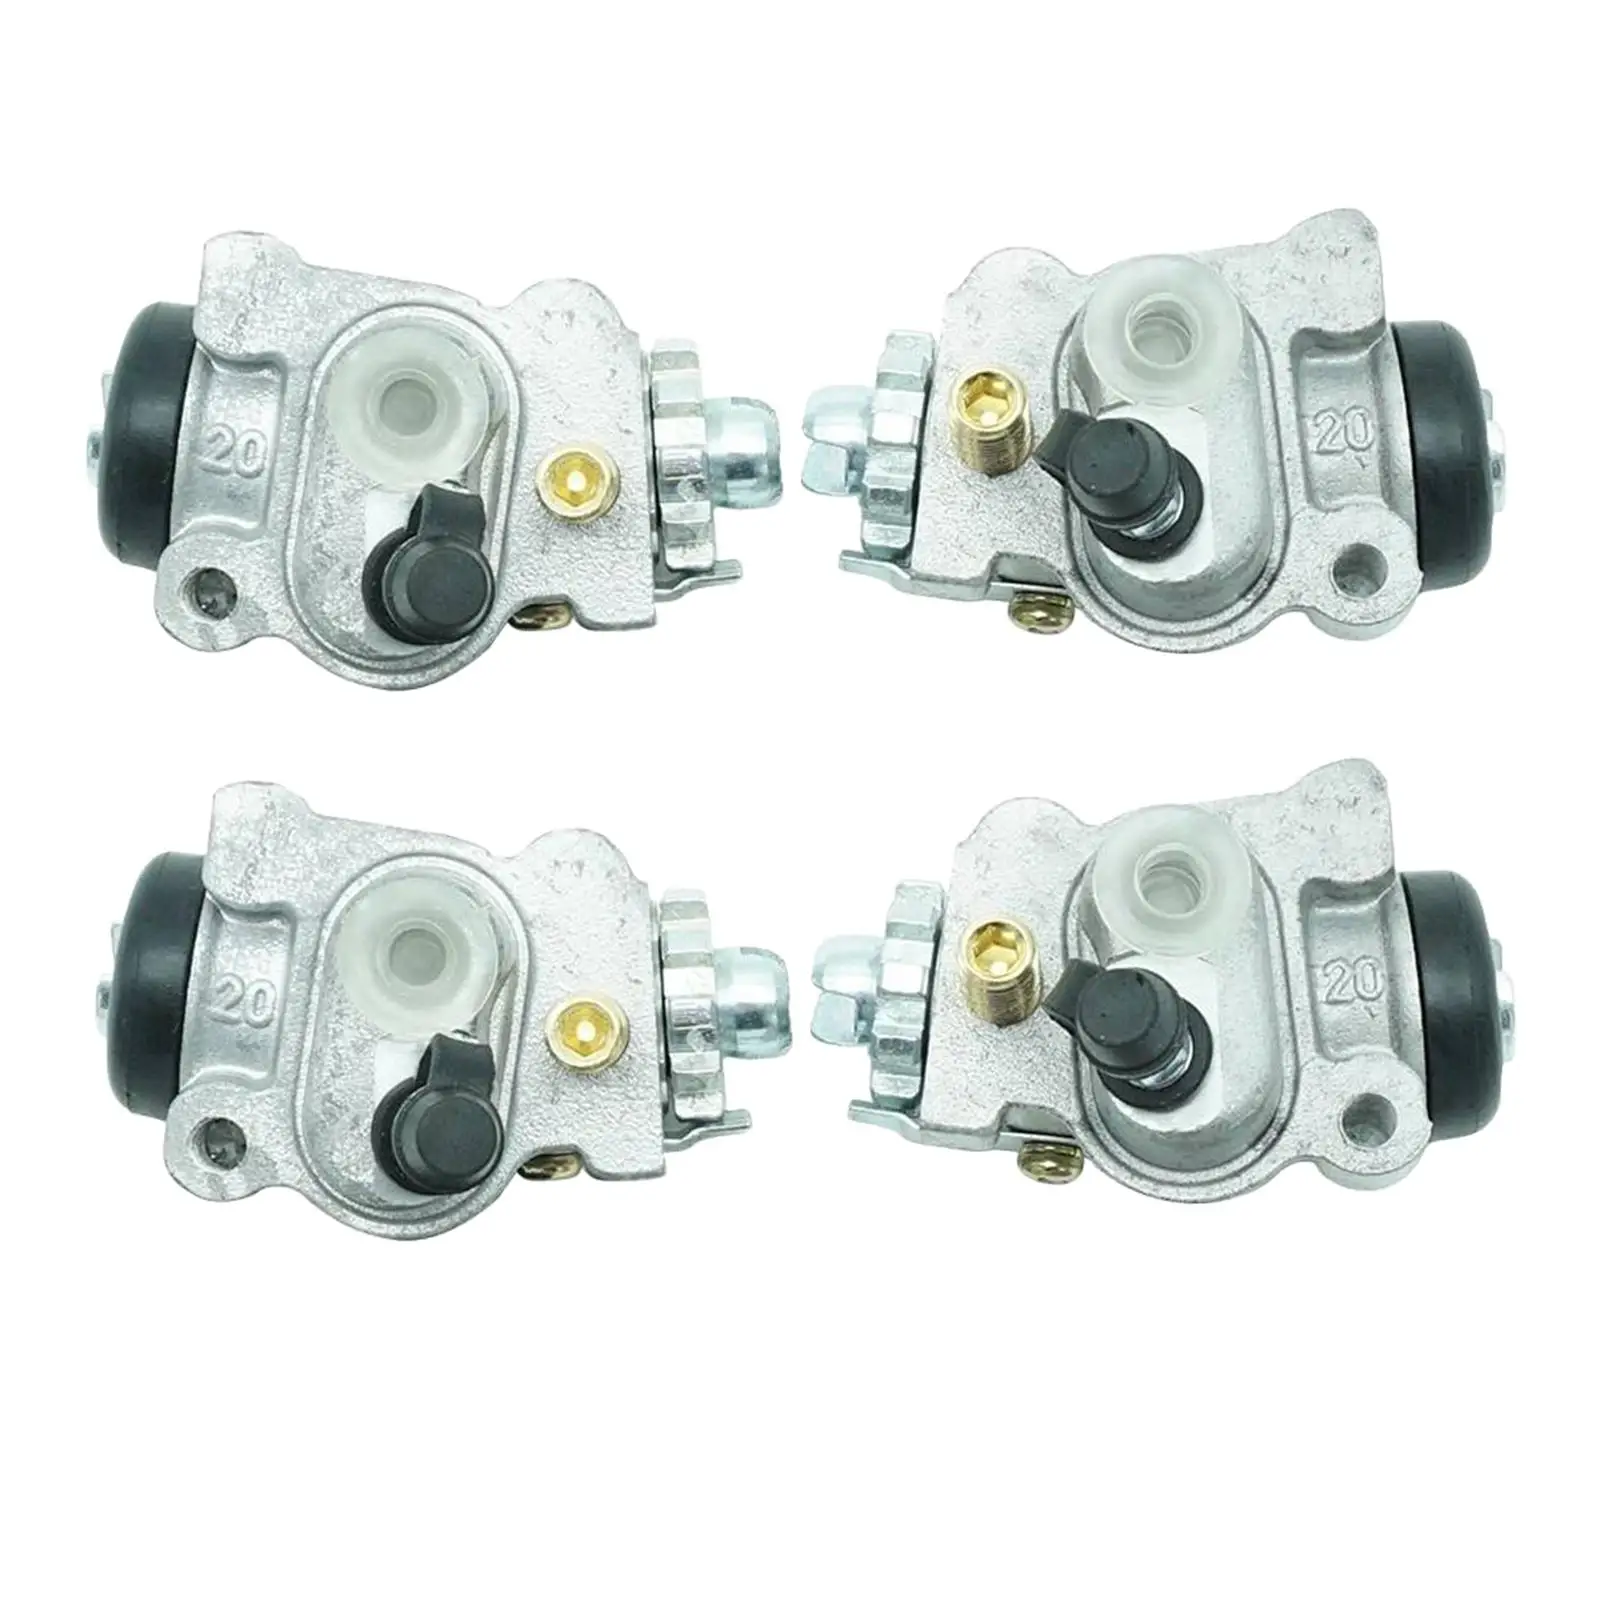 4x 45310-Hn0-A01 Front Brake Wheel Cylinders for Honda Foreman 450 Replaces Parts Car Accessories Spare Parts Durable